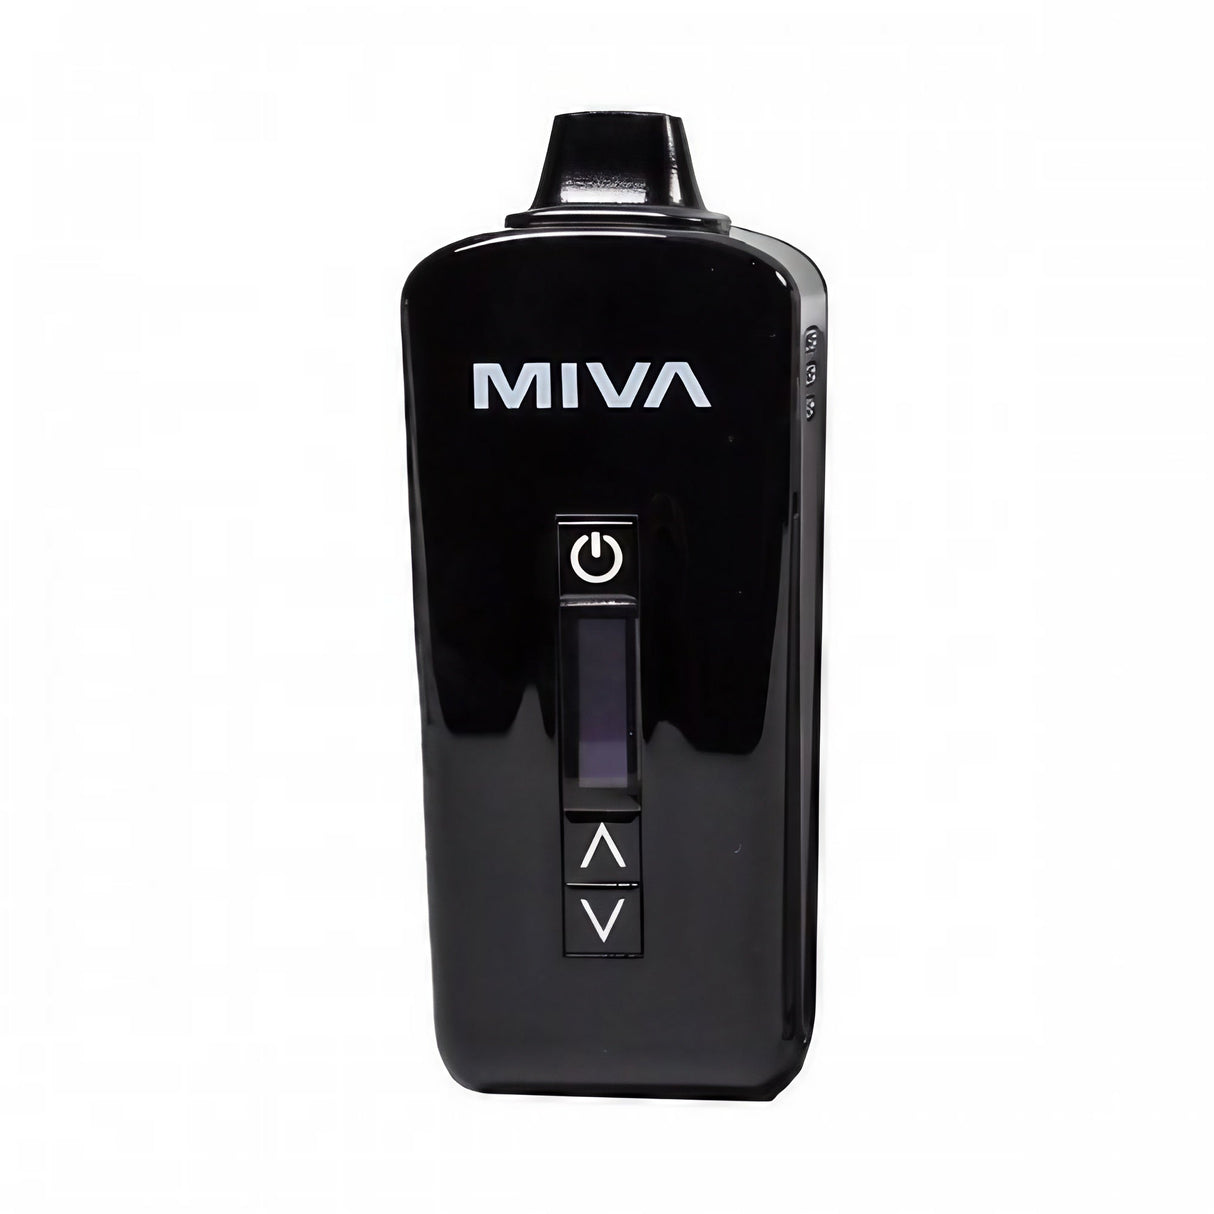 KandyPens MIVA 2 Vaporizer in Black - Front View with OLED Display and Control Buttons